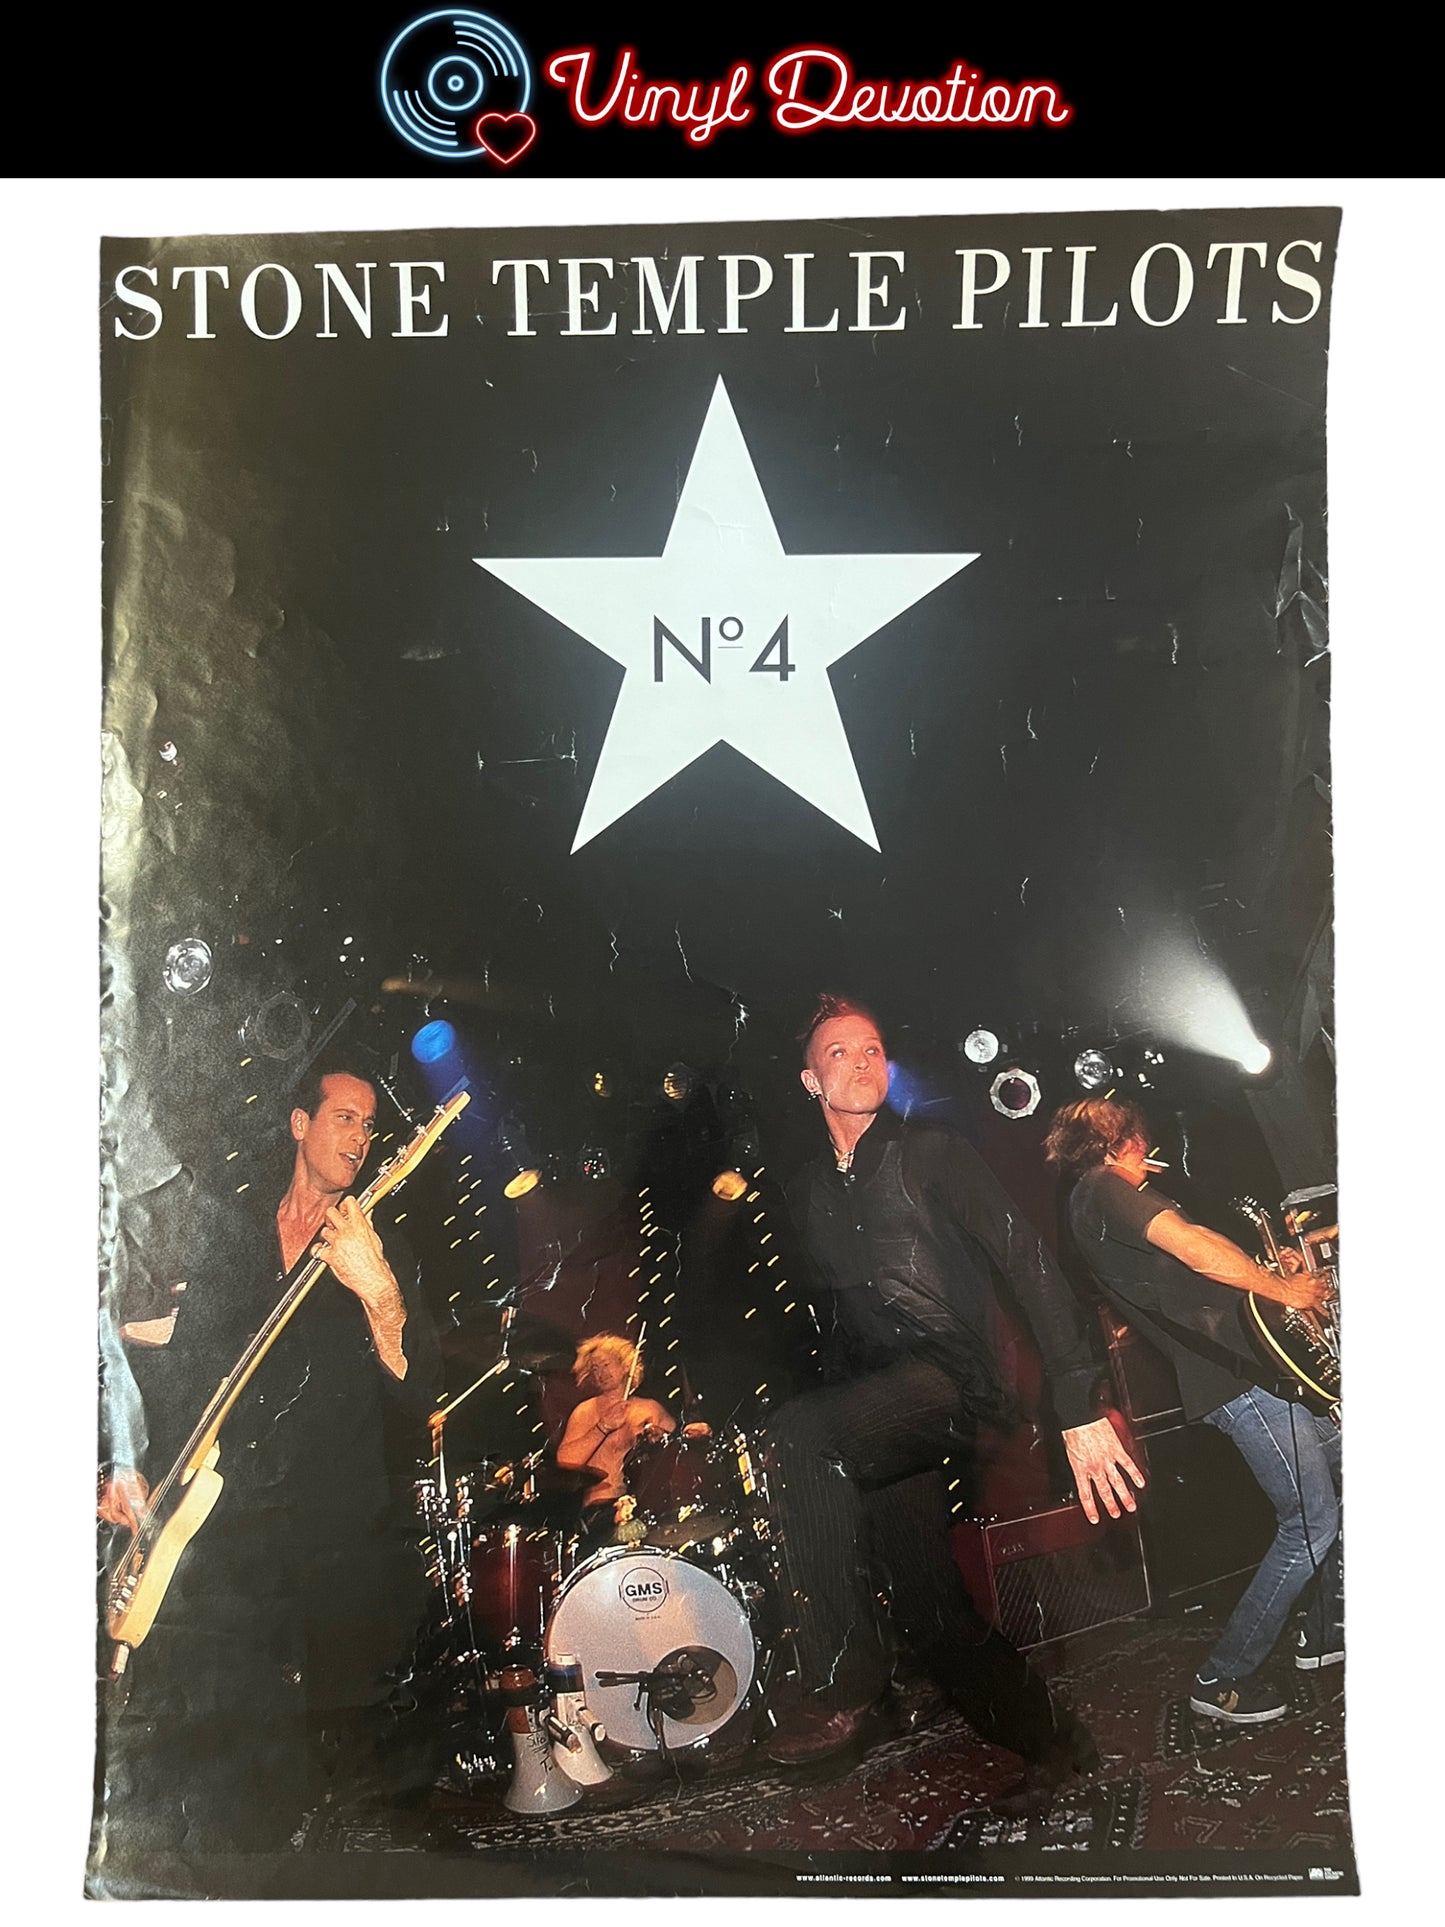 Stone Temple Pilots Vintage Promo Poster 1999 18 x 24 inches Scott Weiland